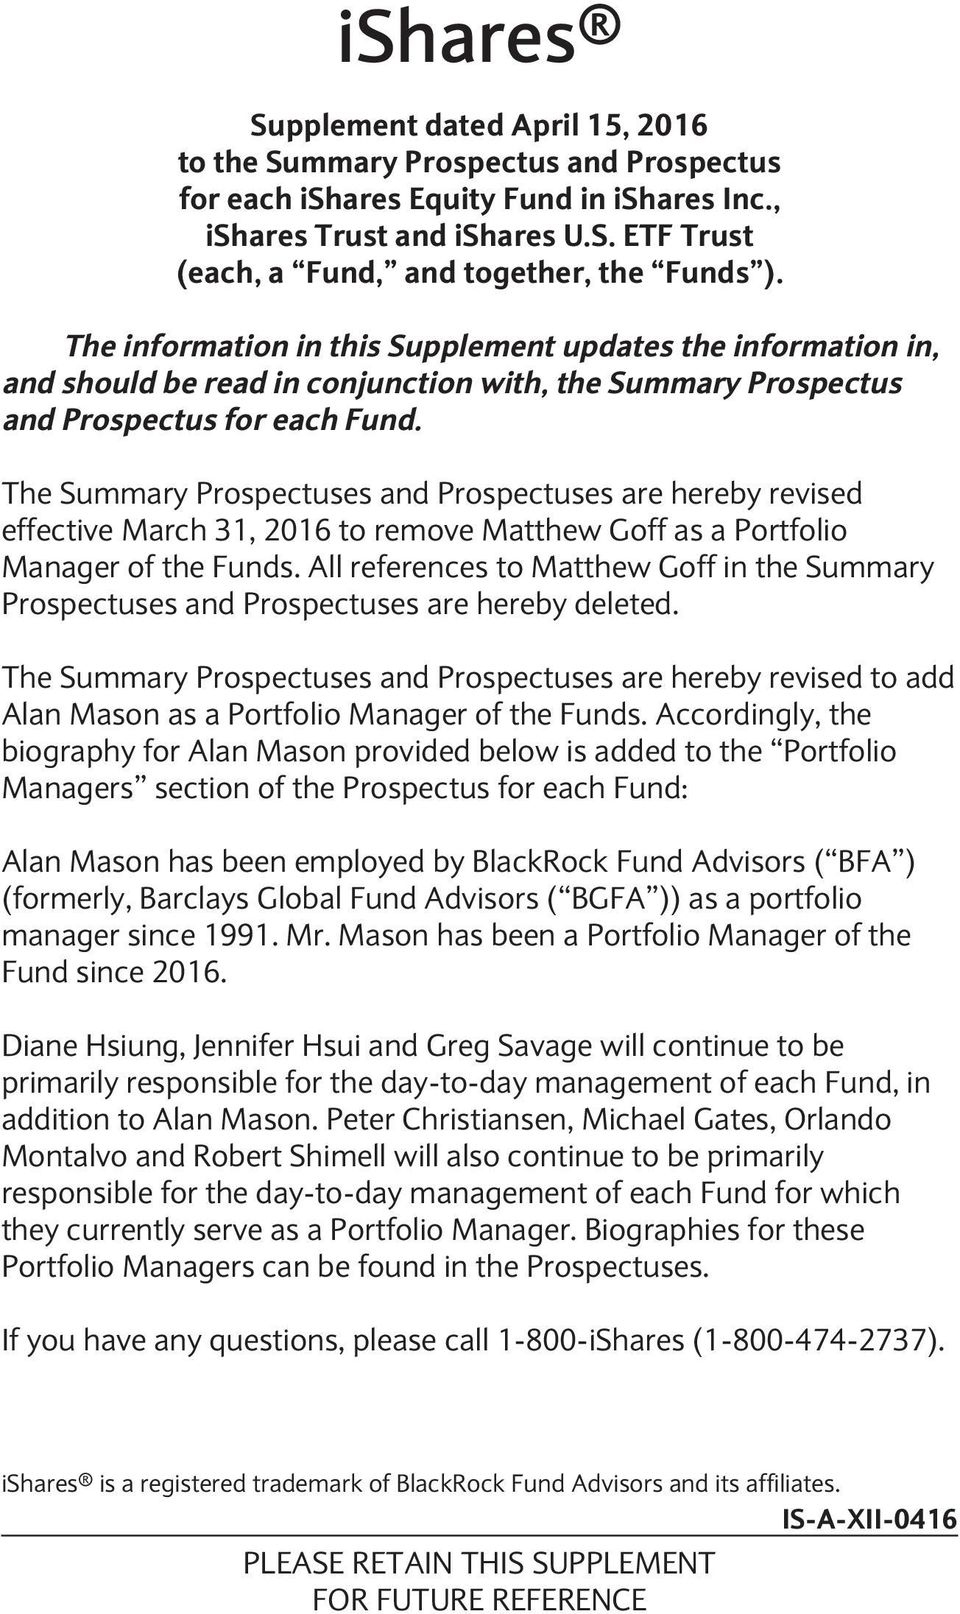 The Summary Prospectuses and Prospectuses are hereby revised effective March 31, 2016 to remove Matthew Goff as a Portfolio Manager of the Funds.